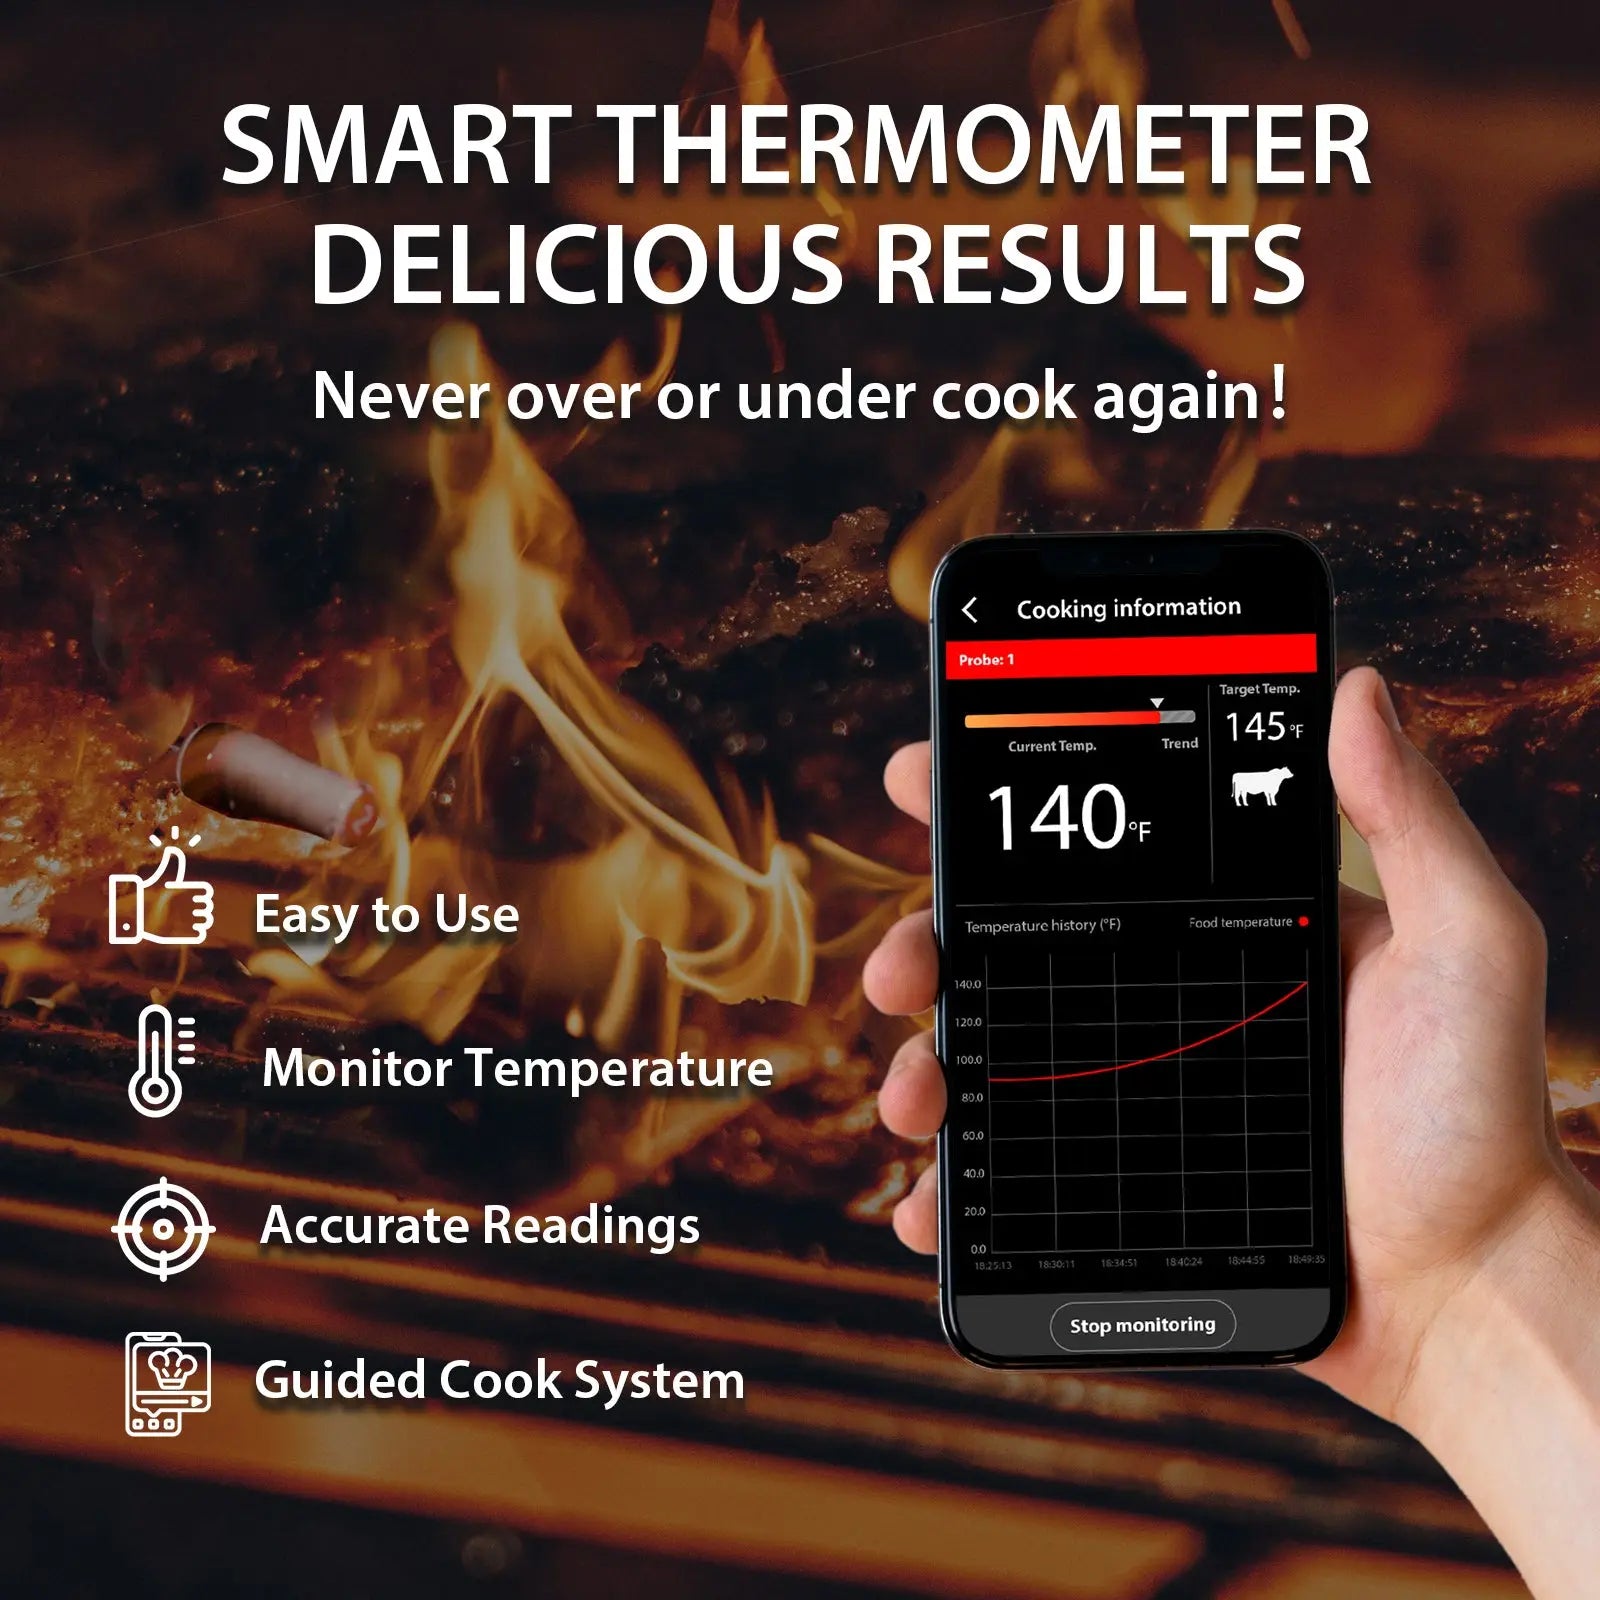 ARMEATOR ONE Smart Bluetooth Wireless Meat Thermometer ARMEATOR